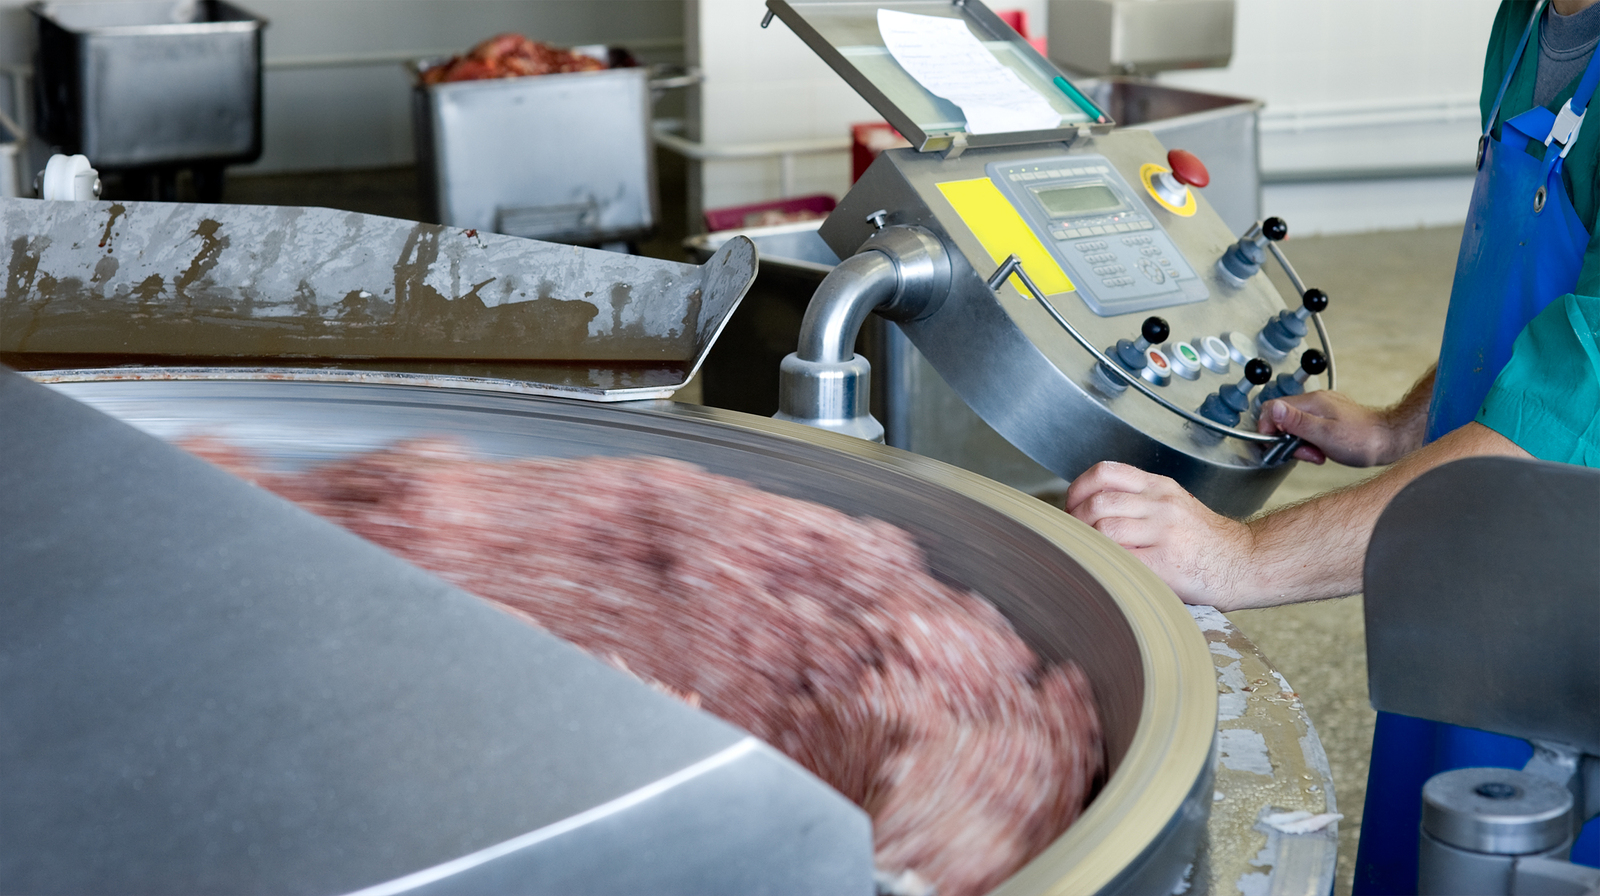 Top 3 Food Processing Machinery Market Trends in the US Through 2020: